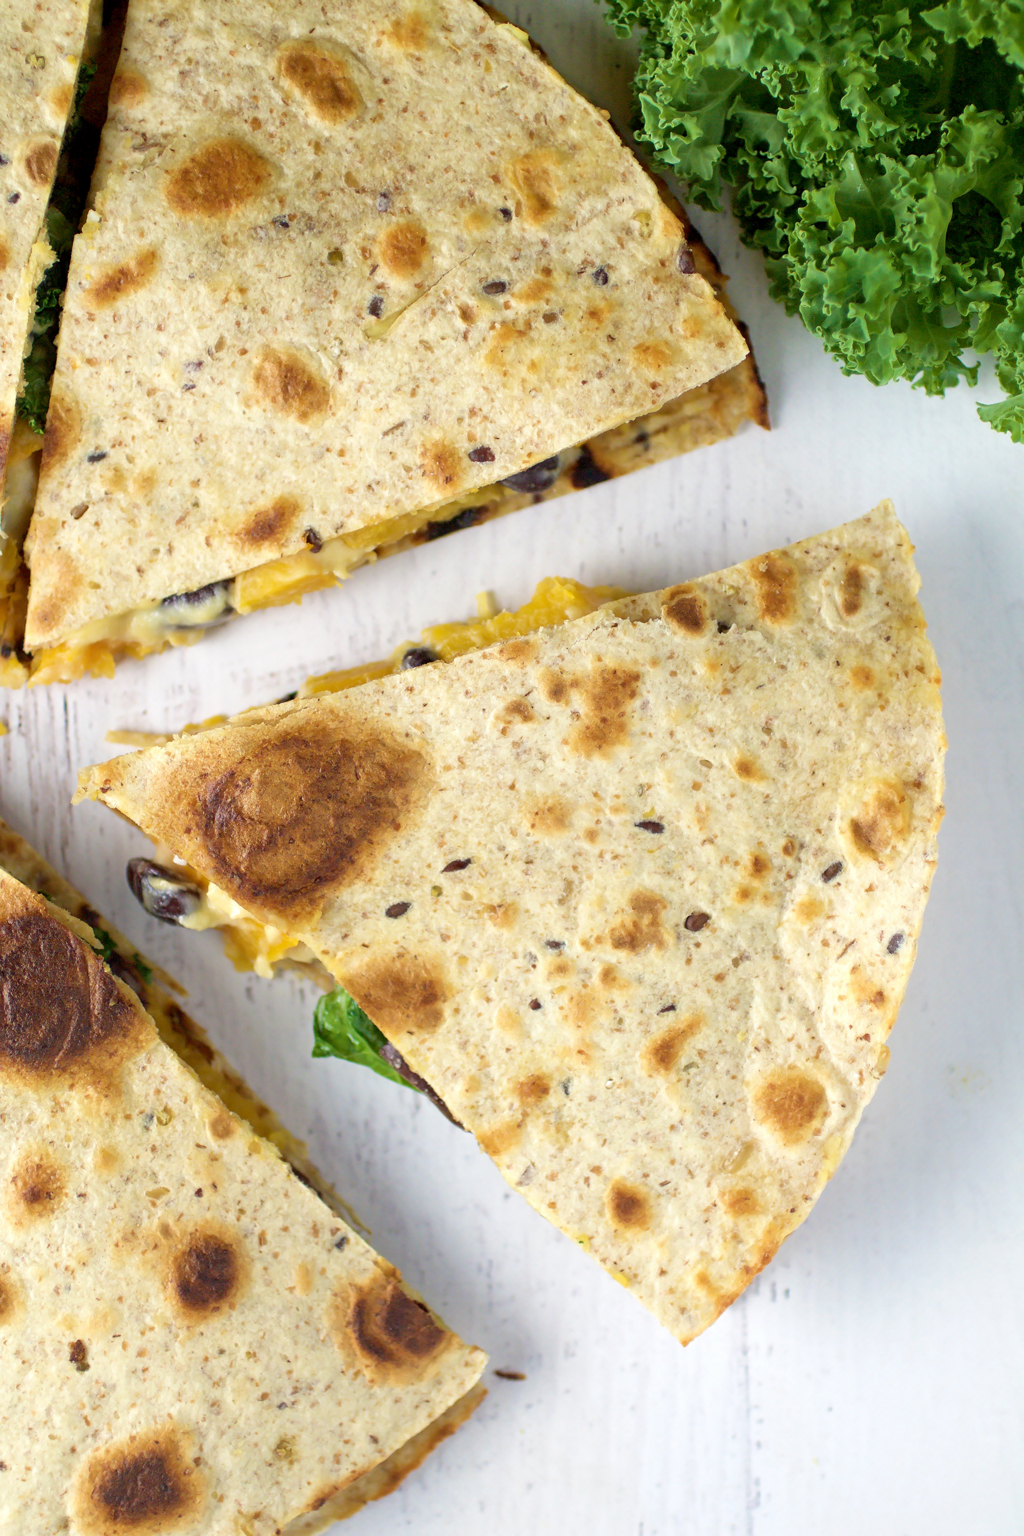 Butternut Squash, Kale and Black Bean Quesadillas - Spinach for Breakfast